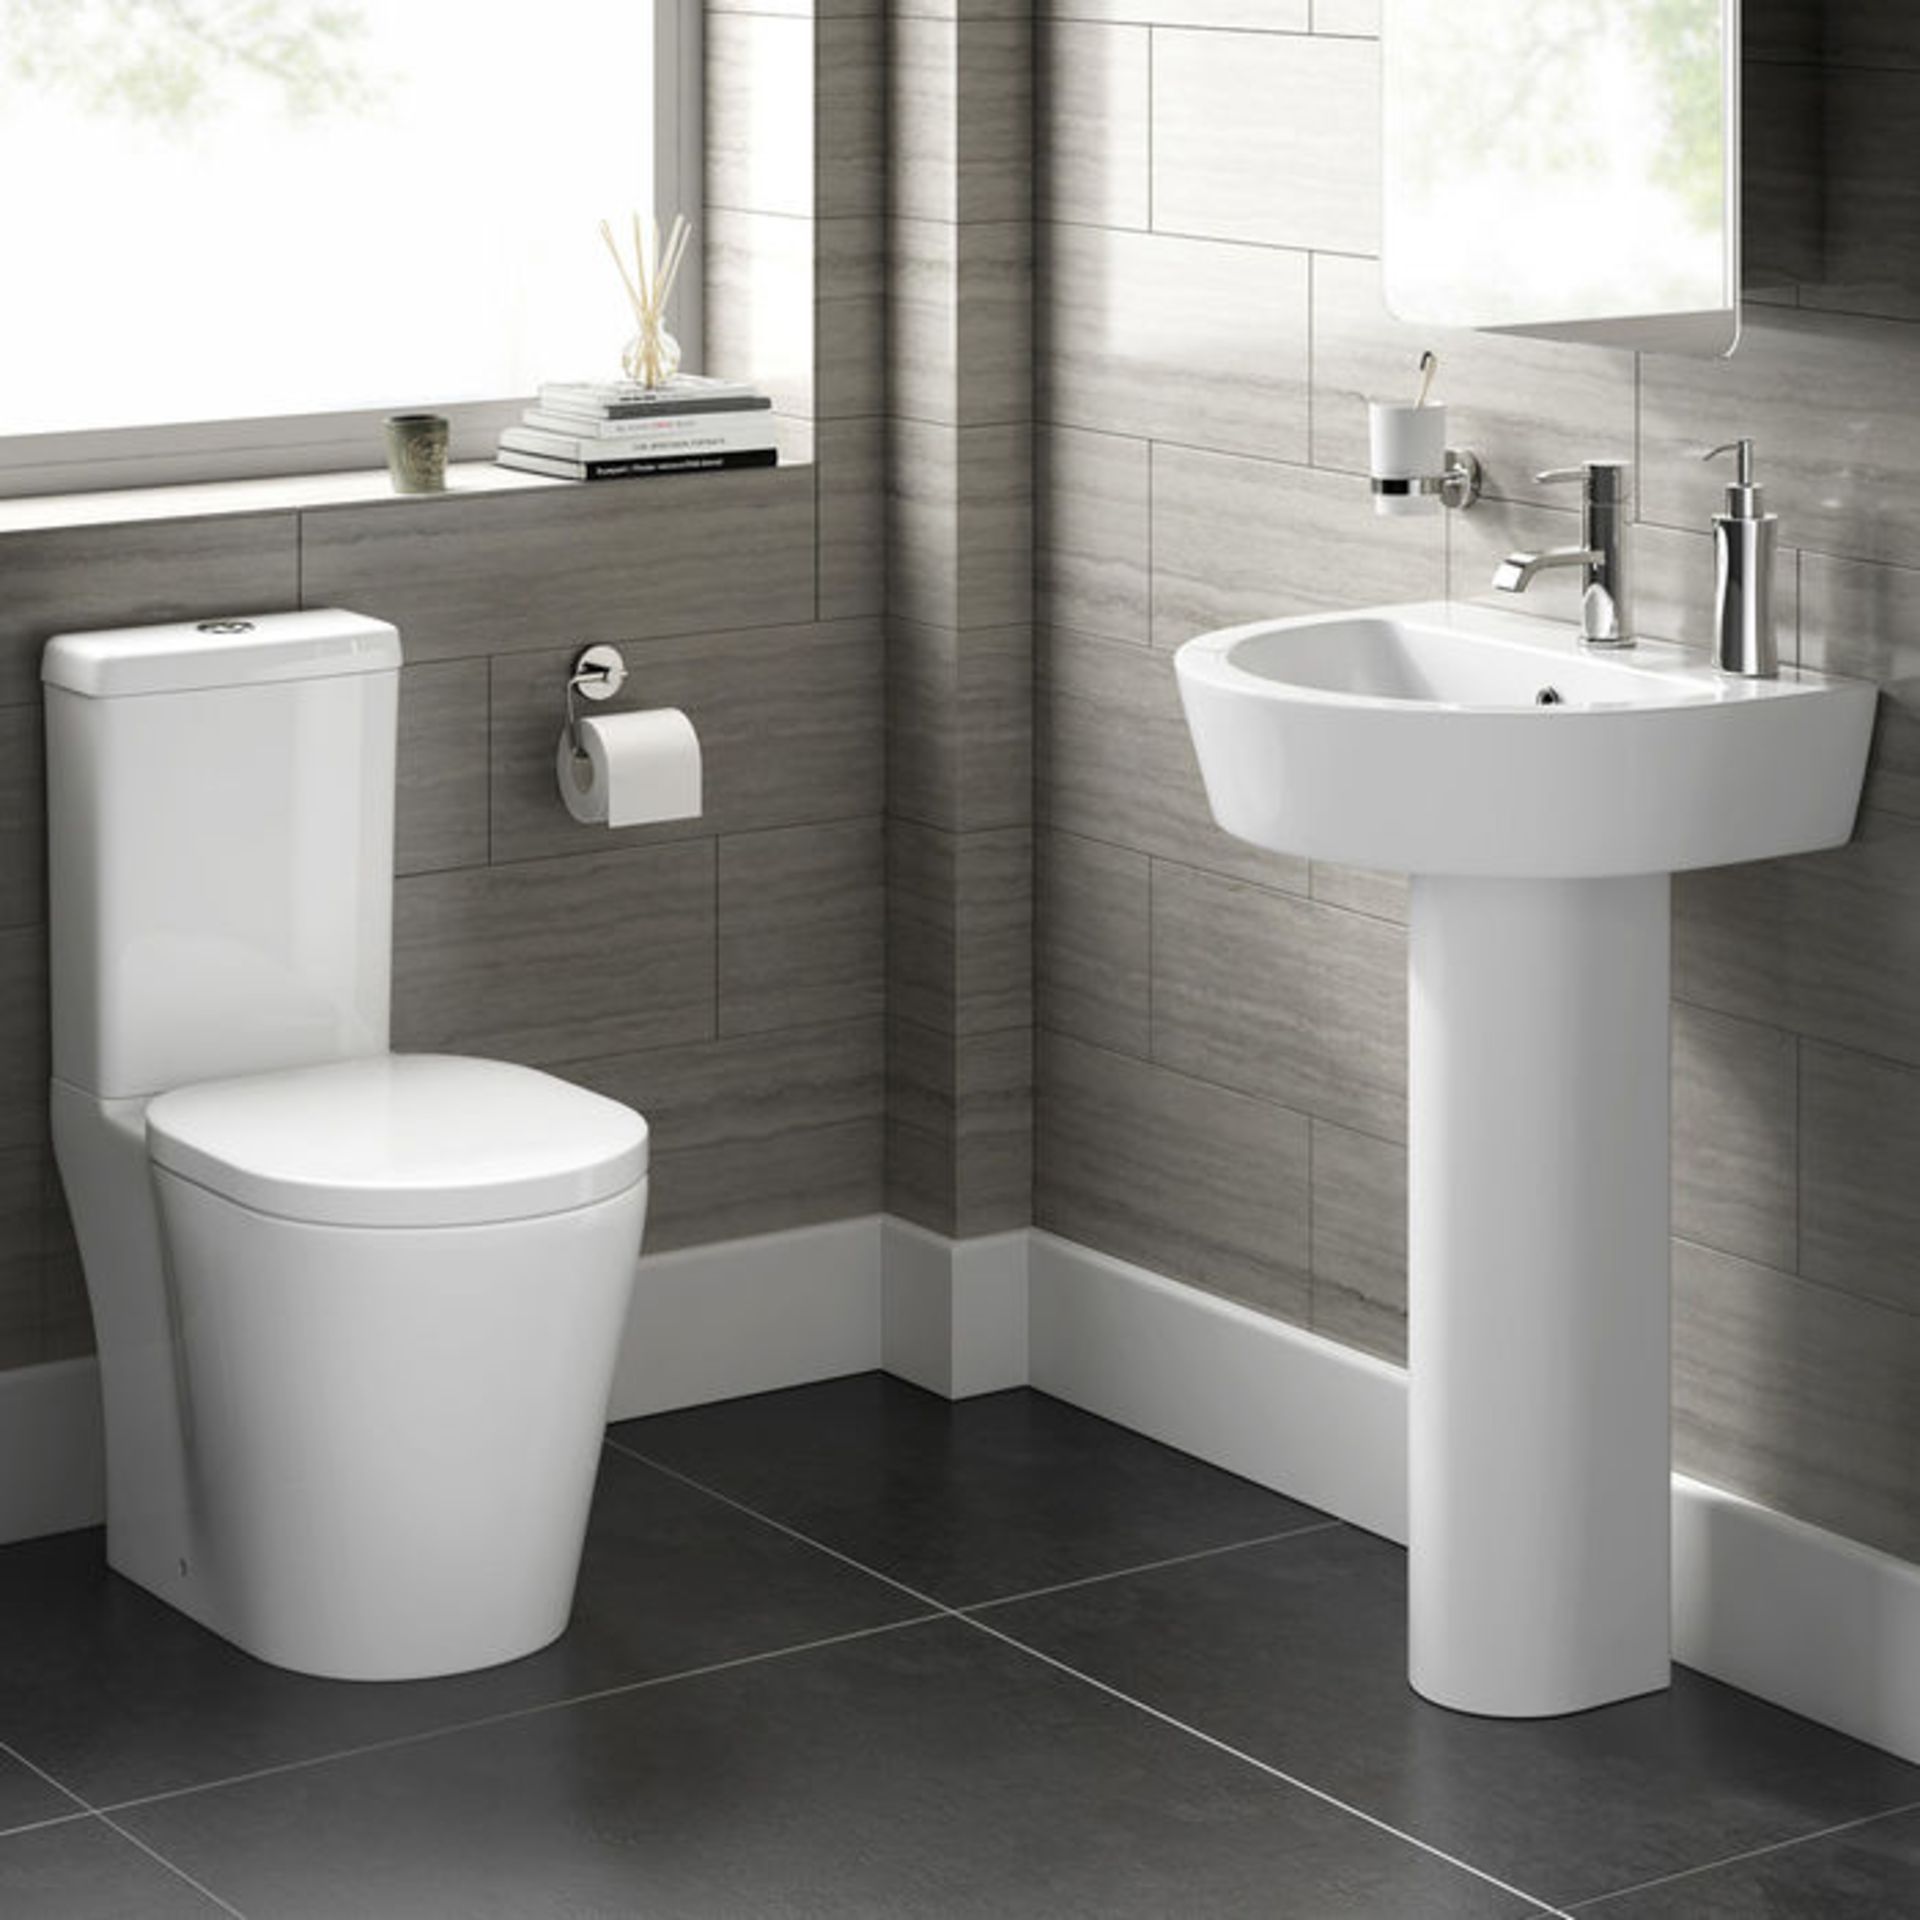 (G14) Albi Close Coupled Toilet & Cistern inc Soft Close Seat RRP £349.99 This innovative toilet - Image 2 of 4